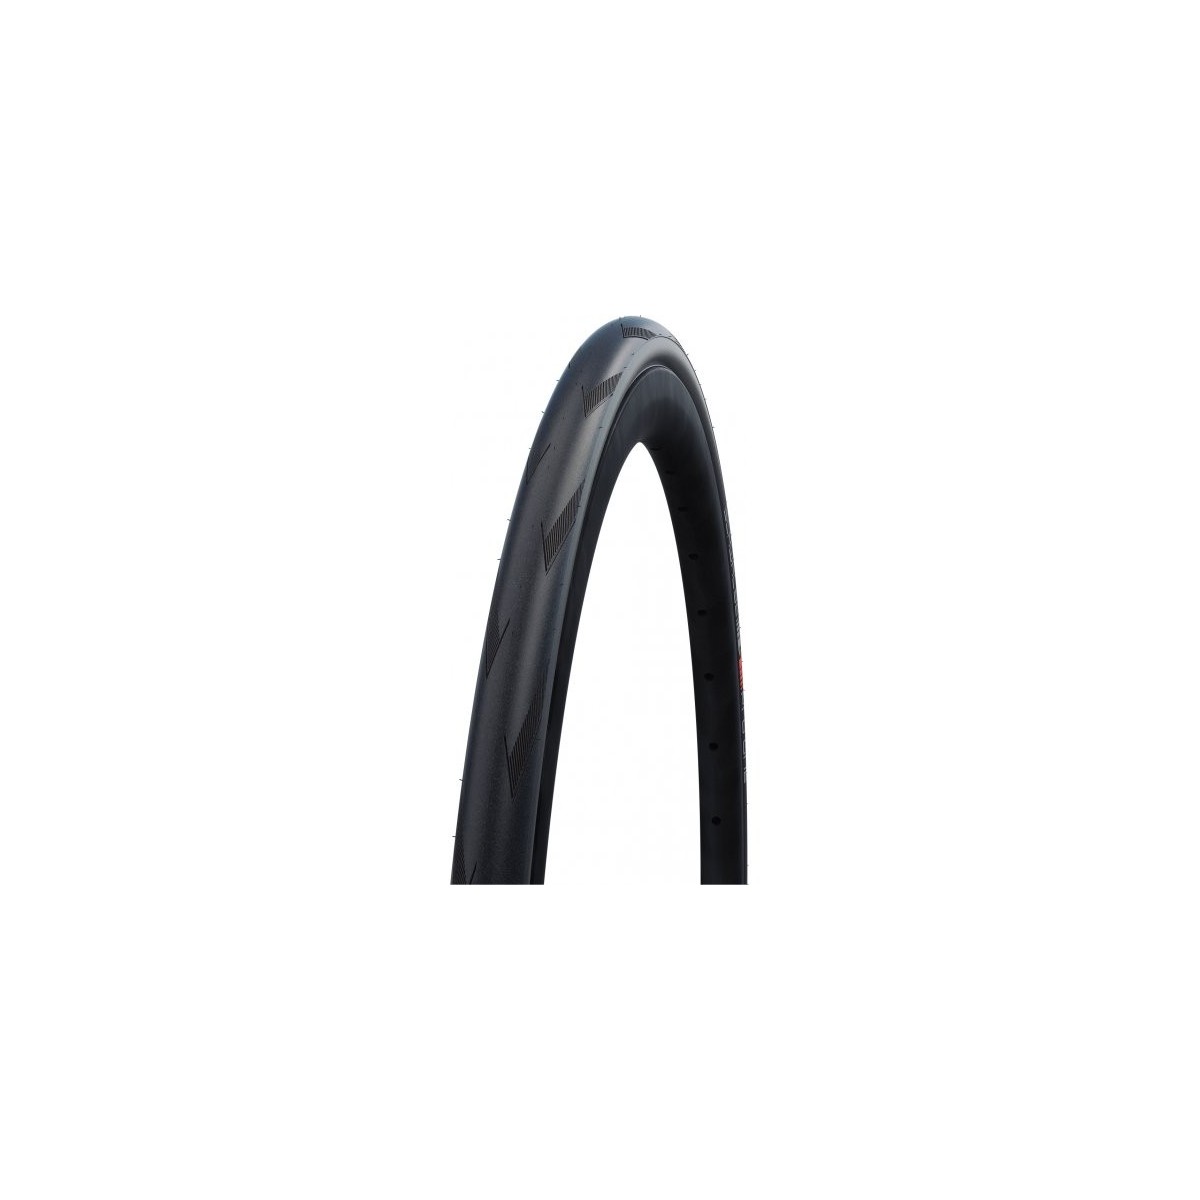 SCHWALBE ONE 700 x 30c Performance Tube type tyre